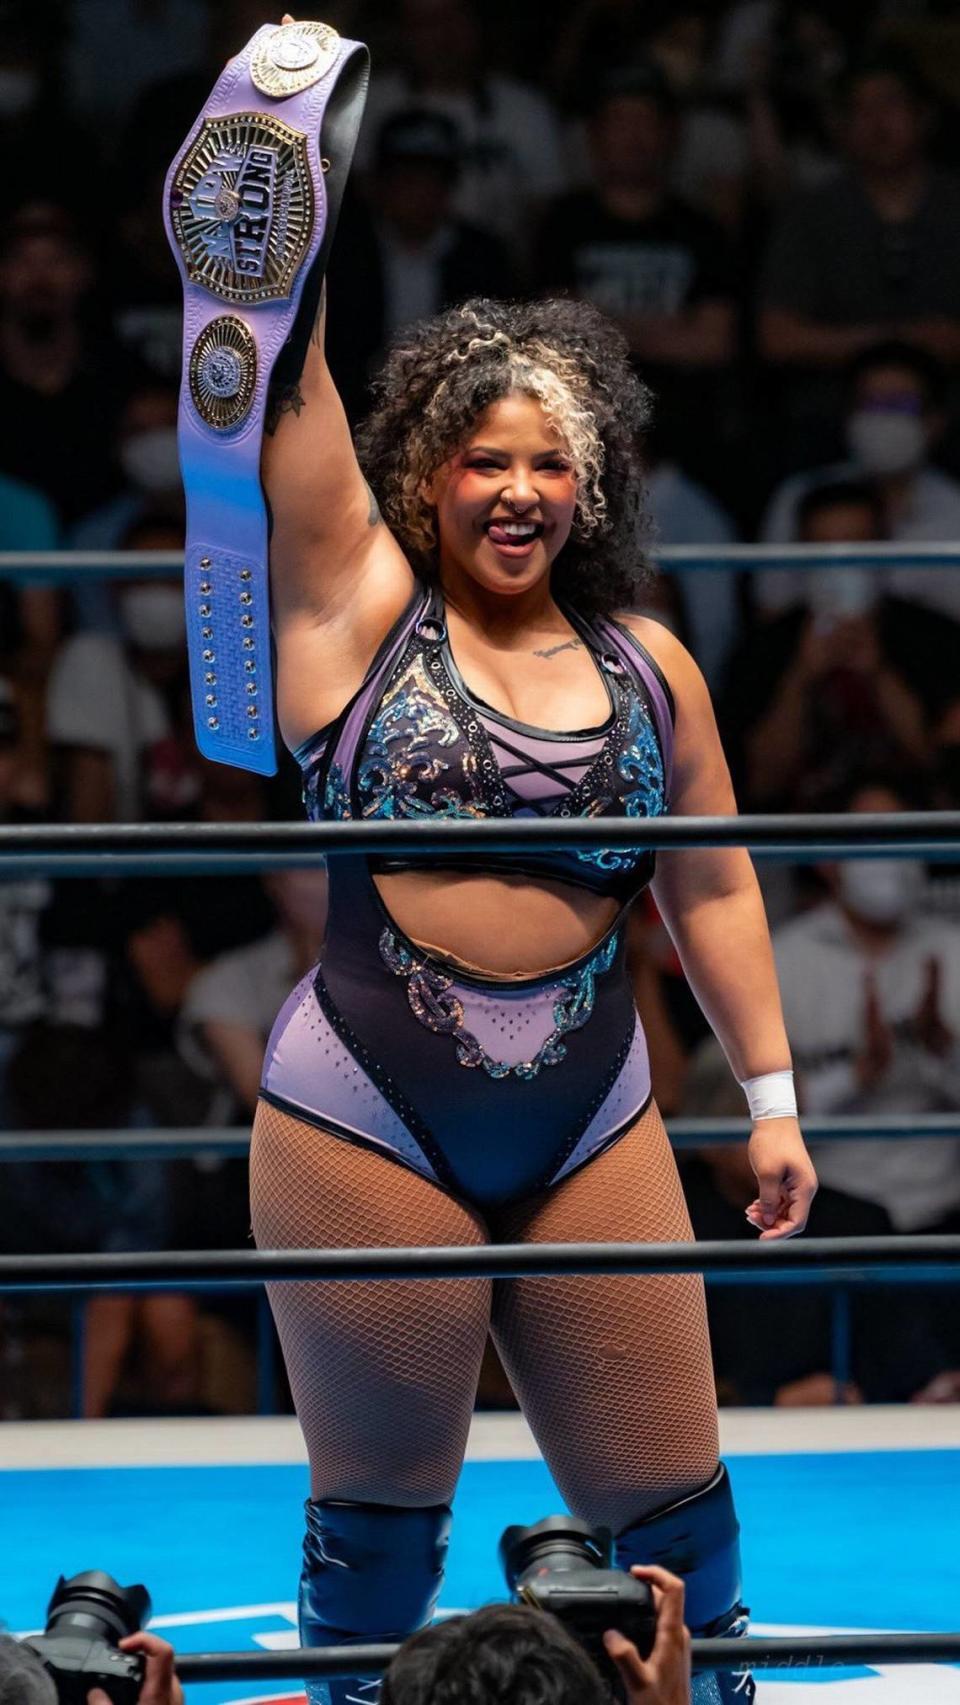 AEW wrestler Willow Nightingale won the inaugural Women’s Strong Championship in New Japan Pro Wrestling.